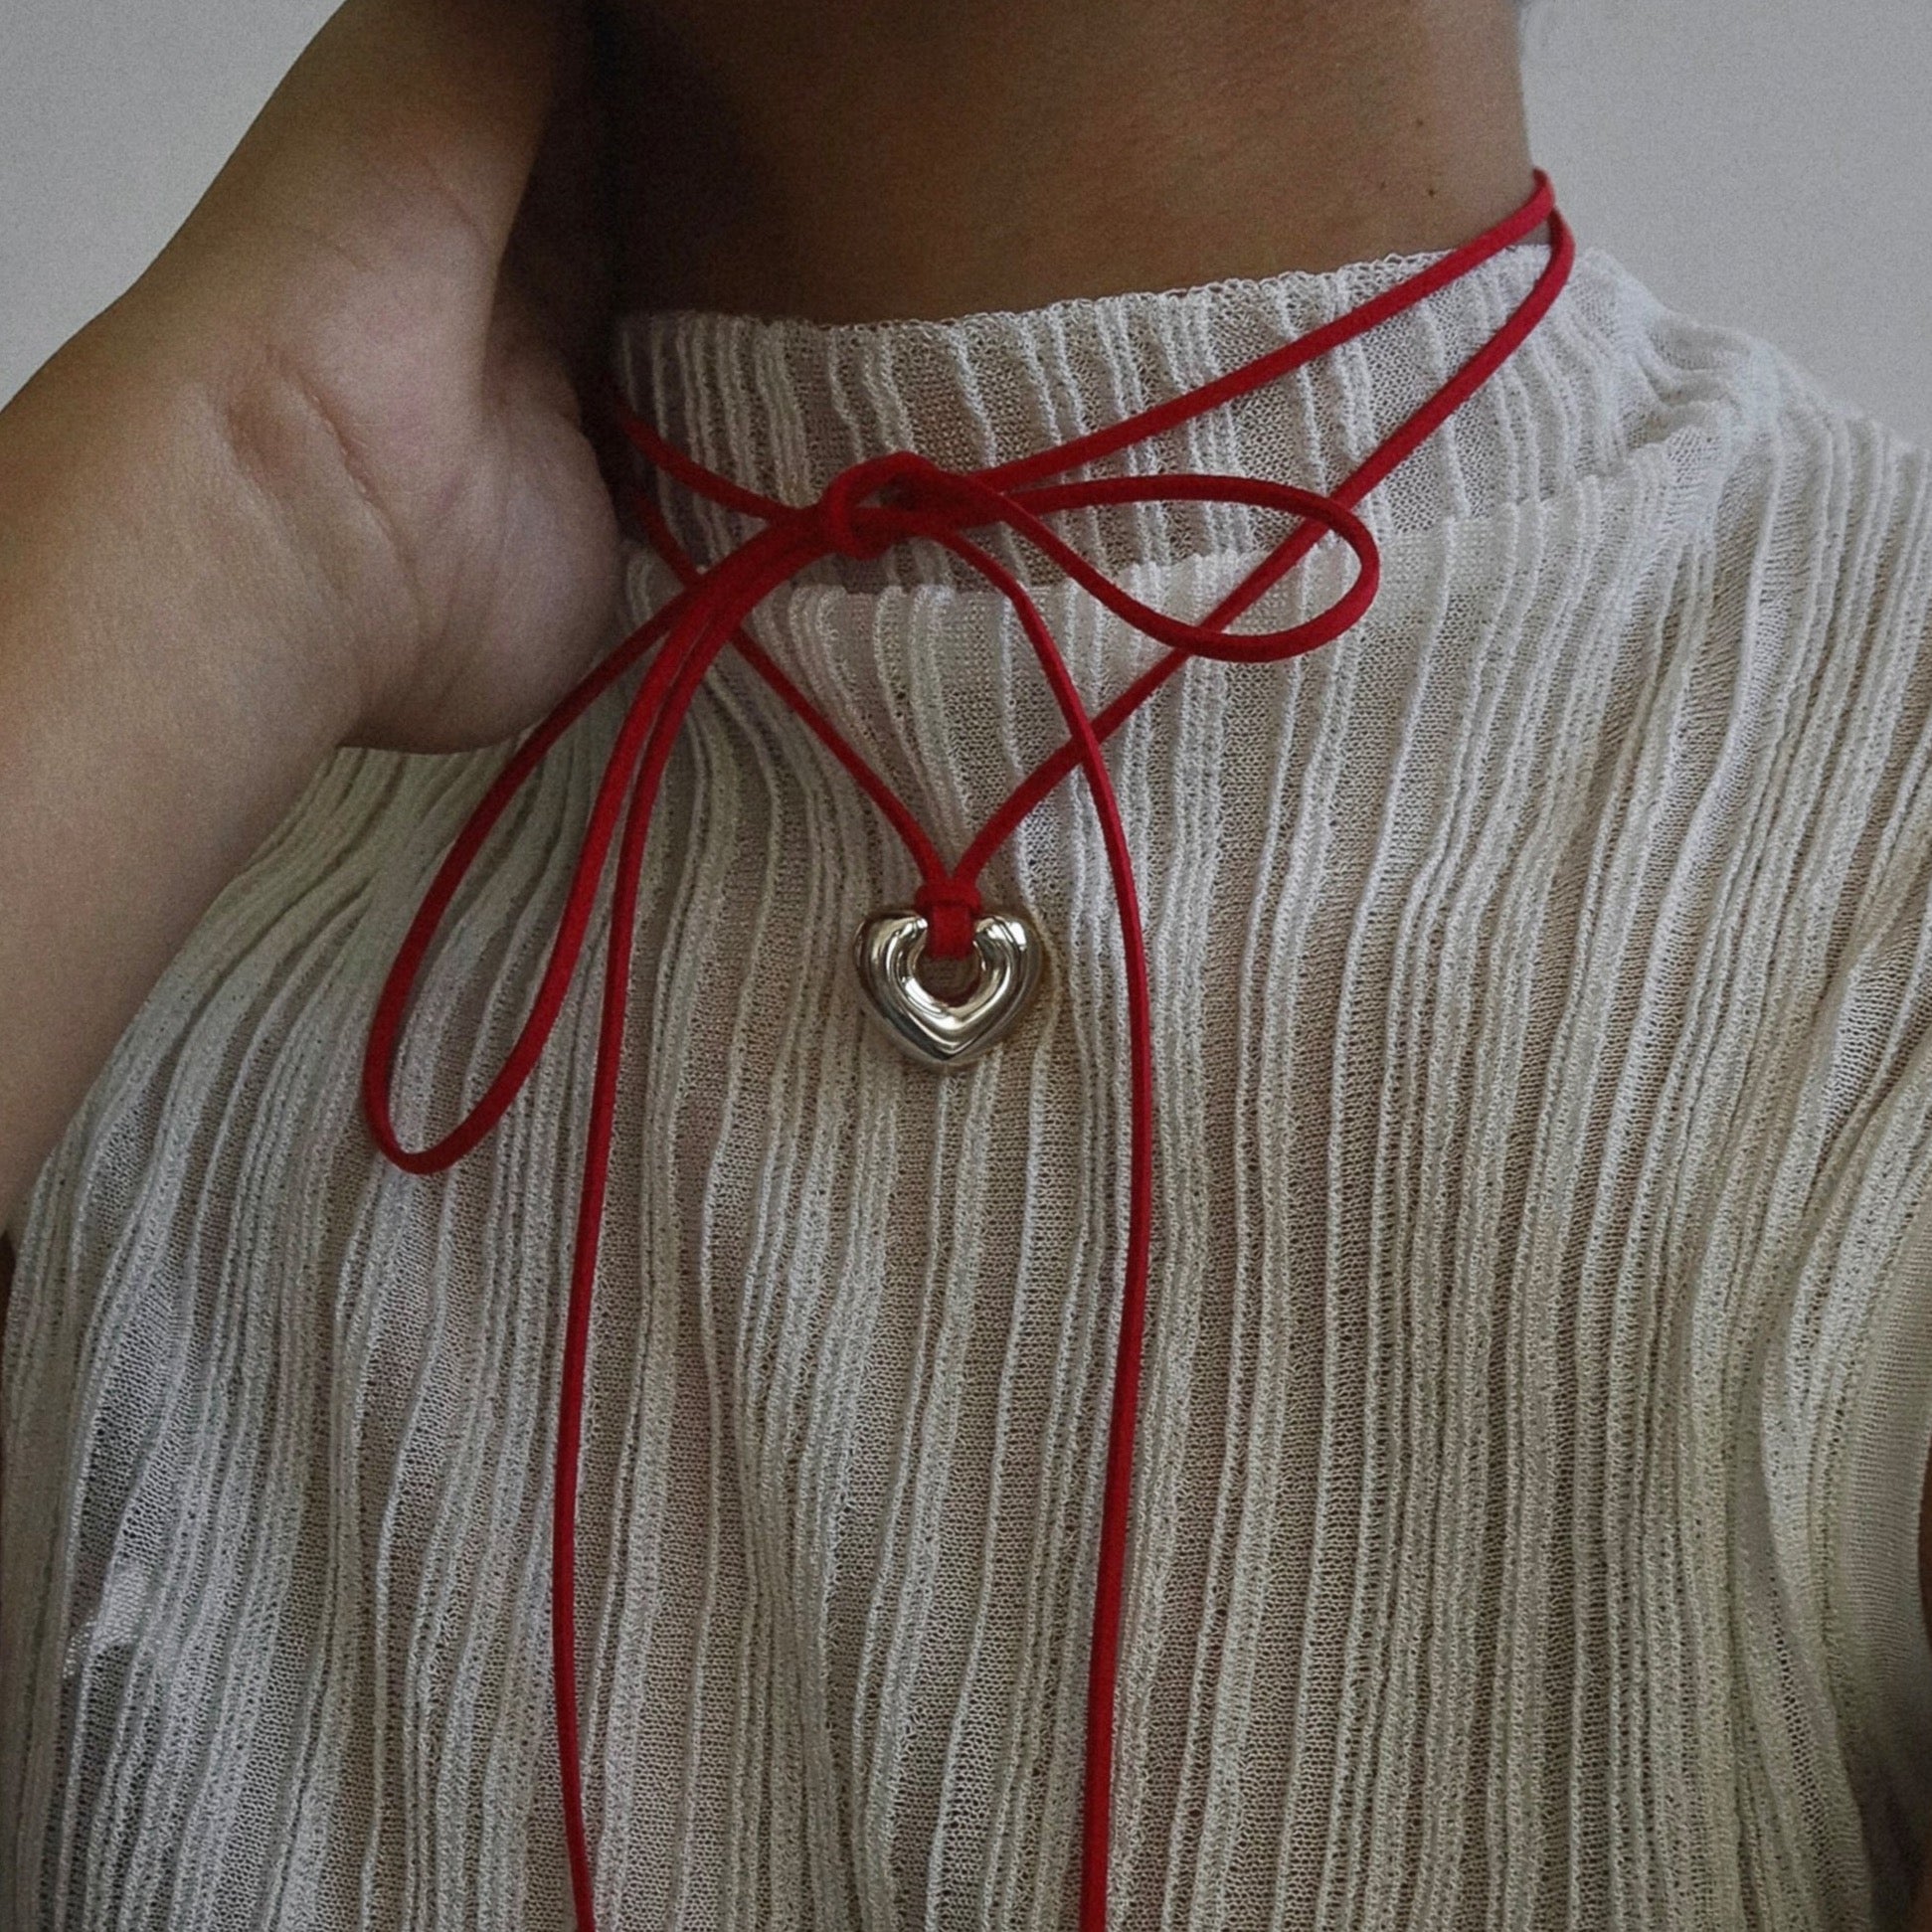 Hayes Heart Pendant Necklace